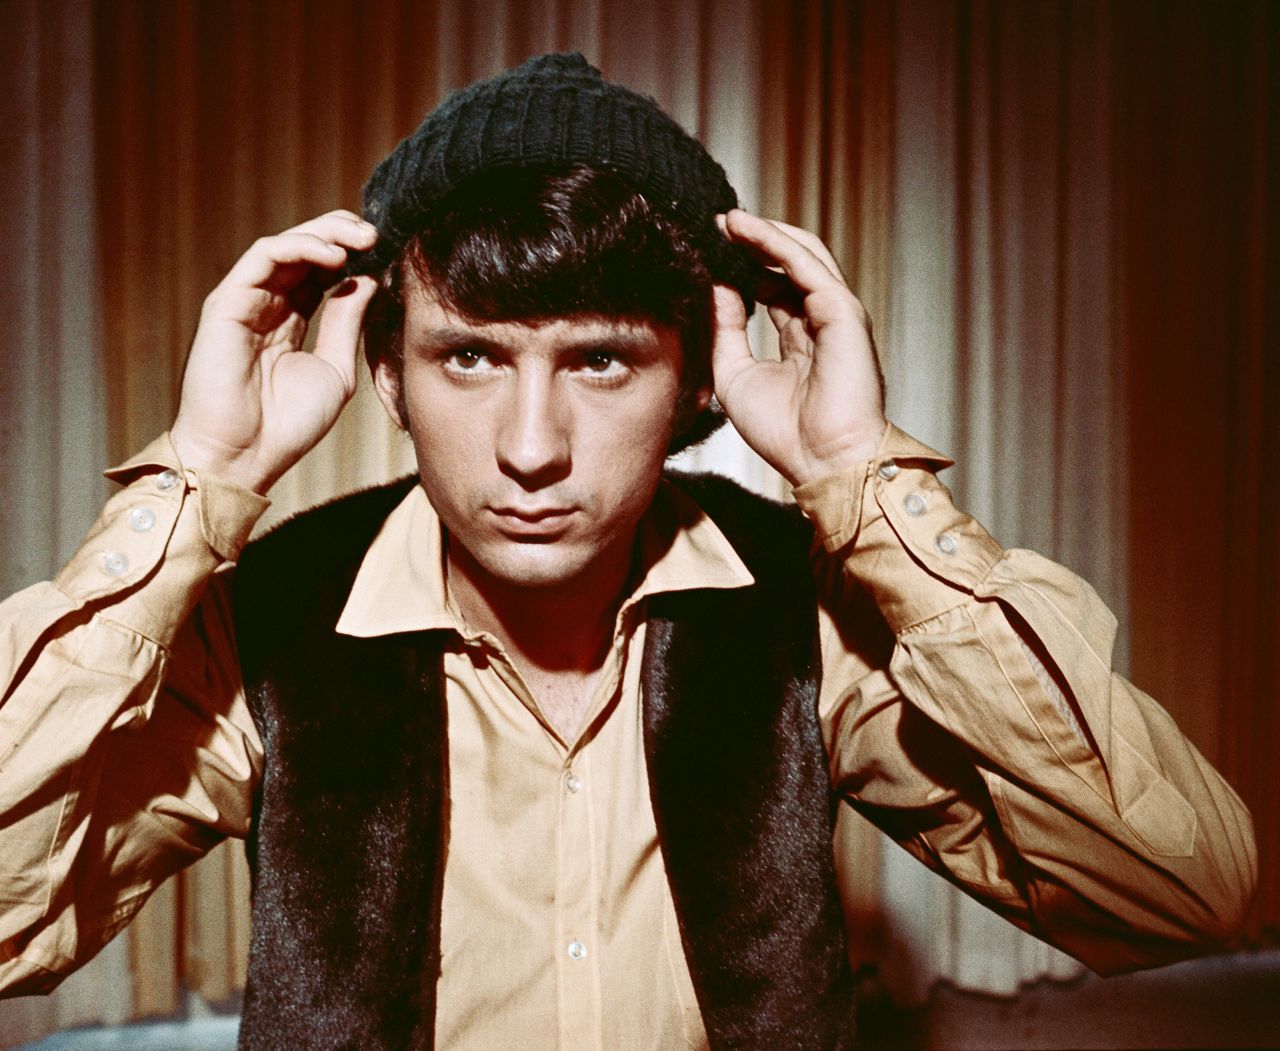 <a href="https://www.cnn.com/2021/12/10/entertainment/michael-nesmith-monkees-dead/index.html" target="_blank">Michael Nesmith,</a> a singer and guitarist for the hit group the Monkees, died on December 10, according to his bandmate Micky Dolenz. He was 78.